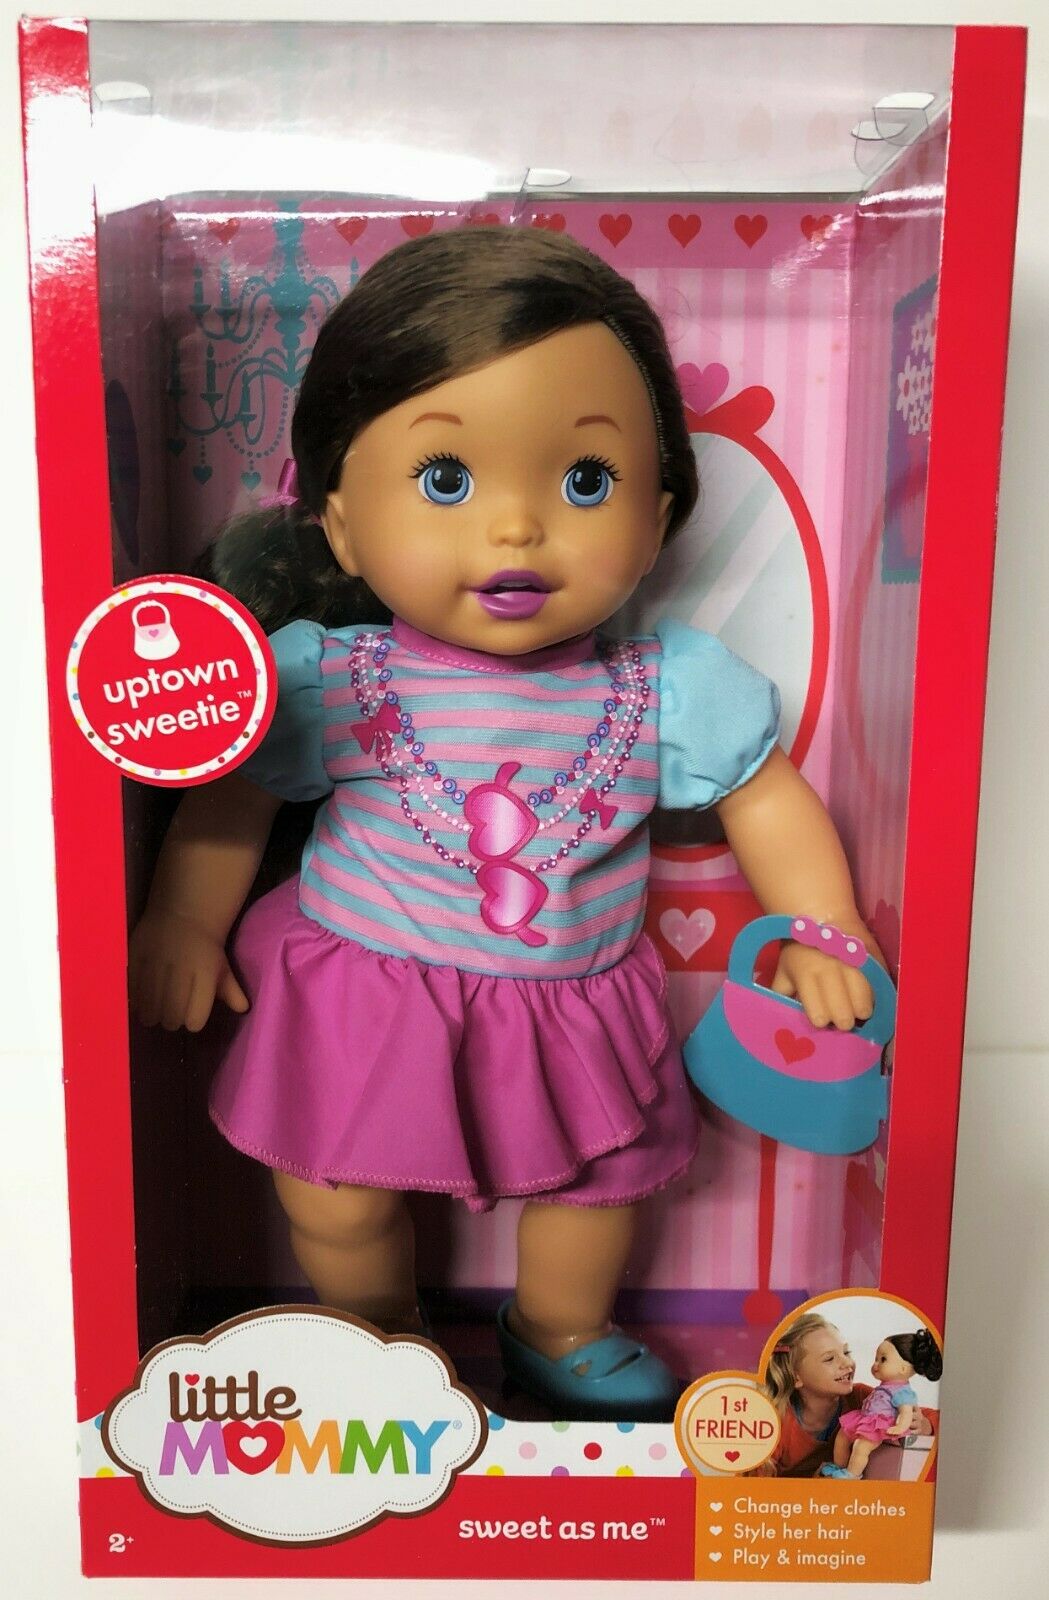 Fisher Price Little Mommy Uptown Girl Sweet As Me 14" Doll 1st Friend Brand New